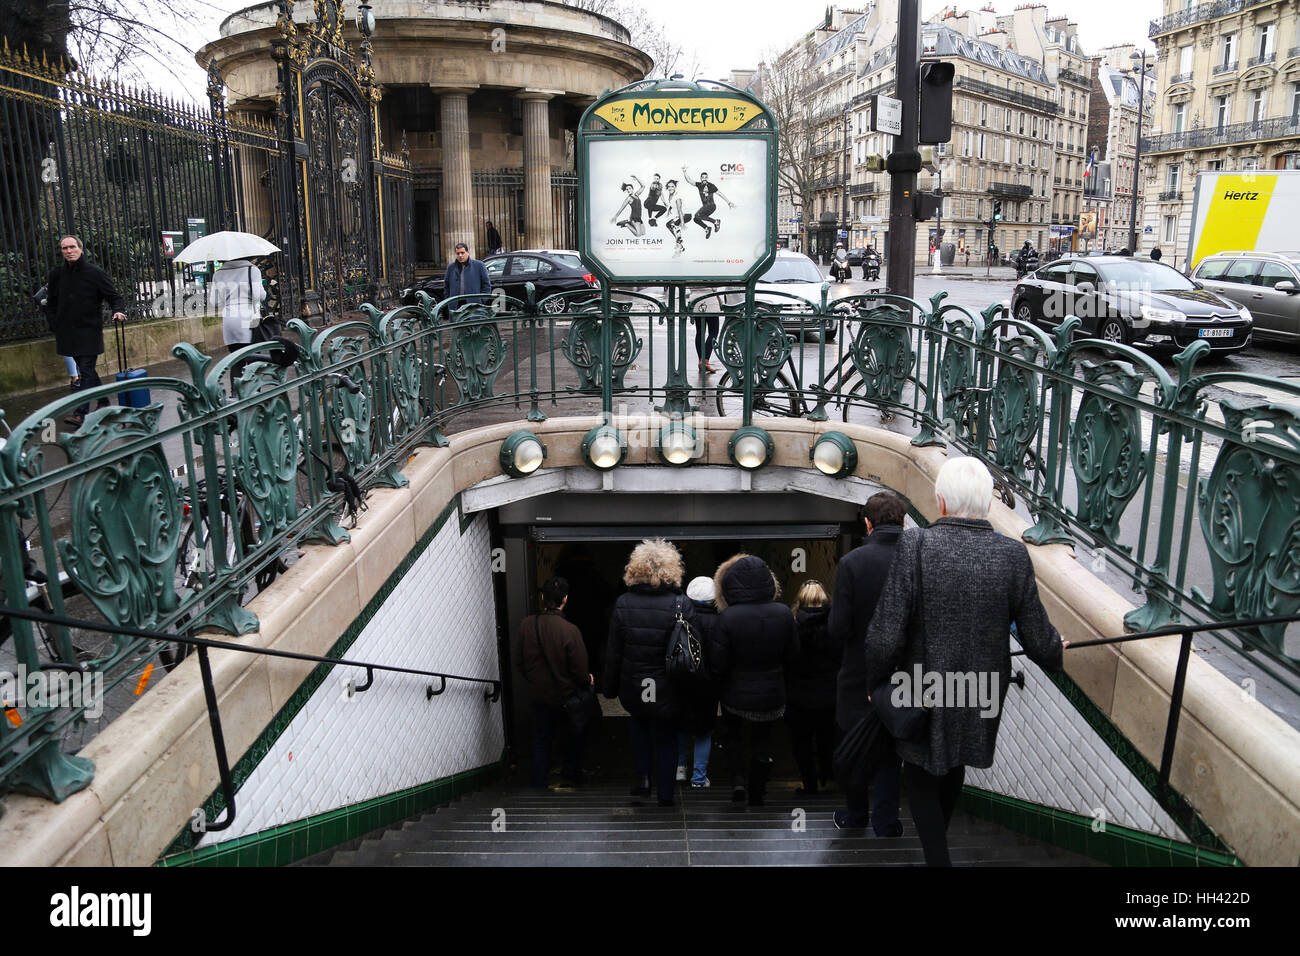 The Monceau Metro station in Paris, France. Stock Photo